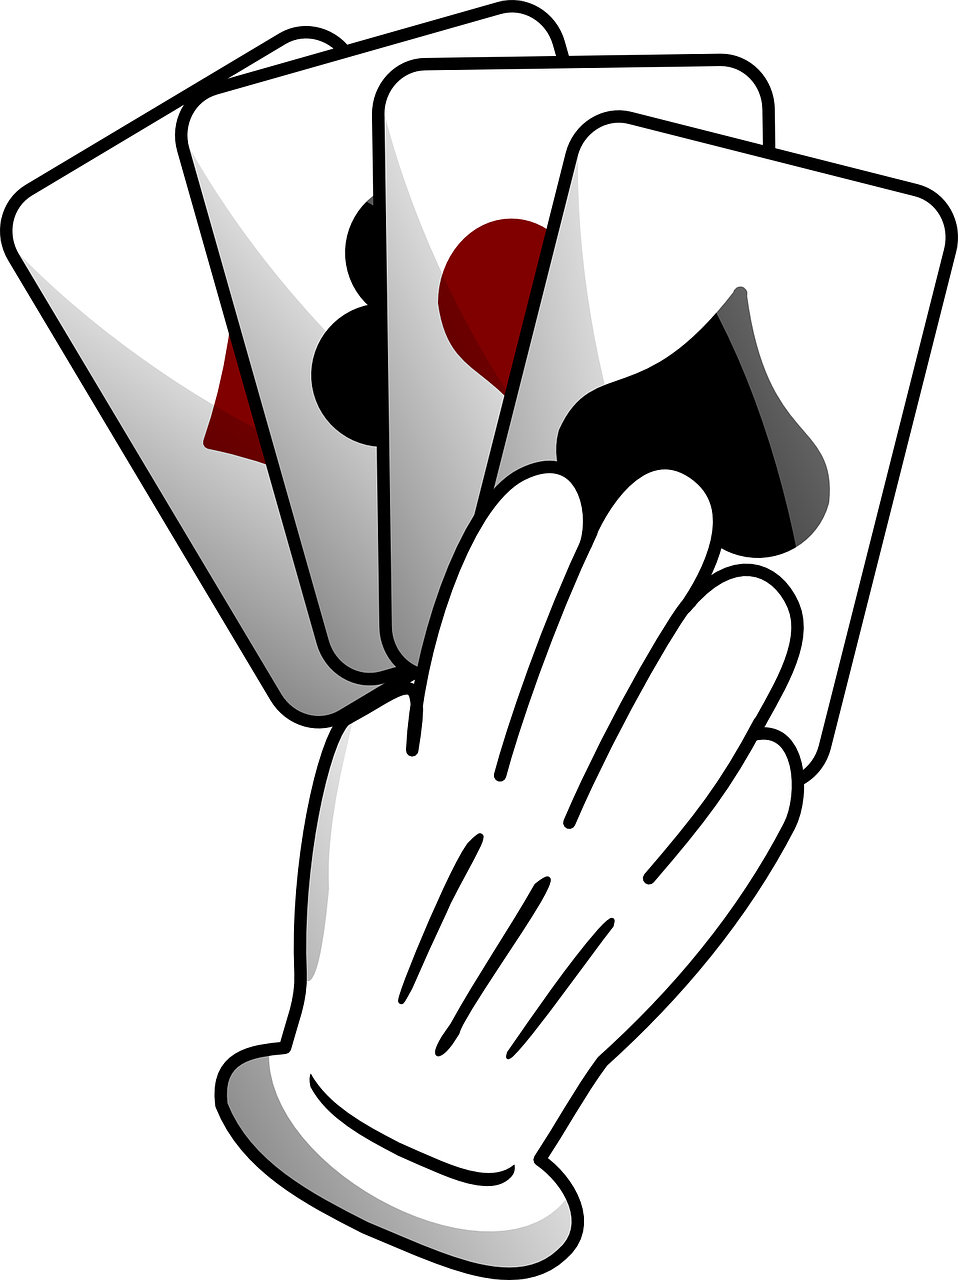 Playing Cards Suits Hand Diamond Spade Heart Club - Hand Of Cards Clip Art (958x1280)